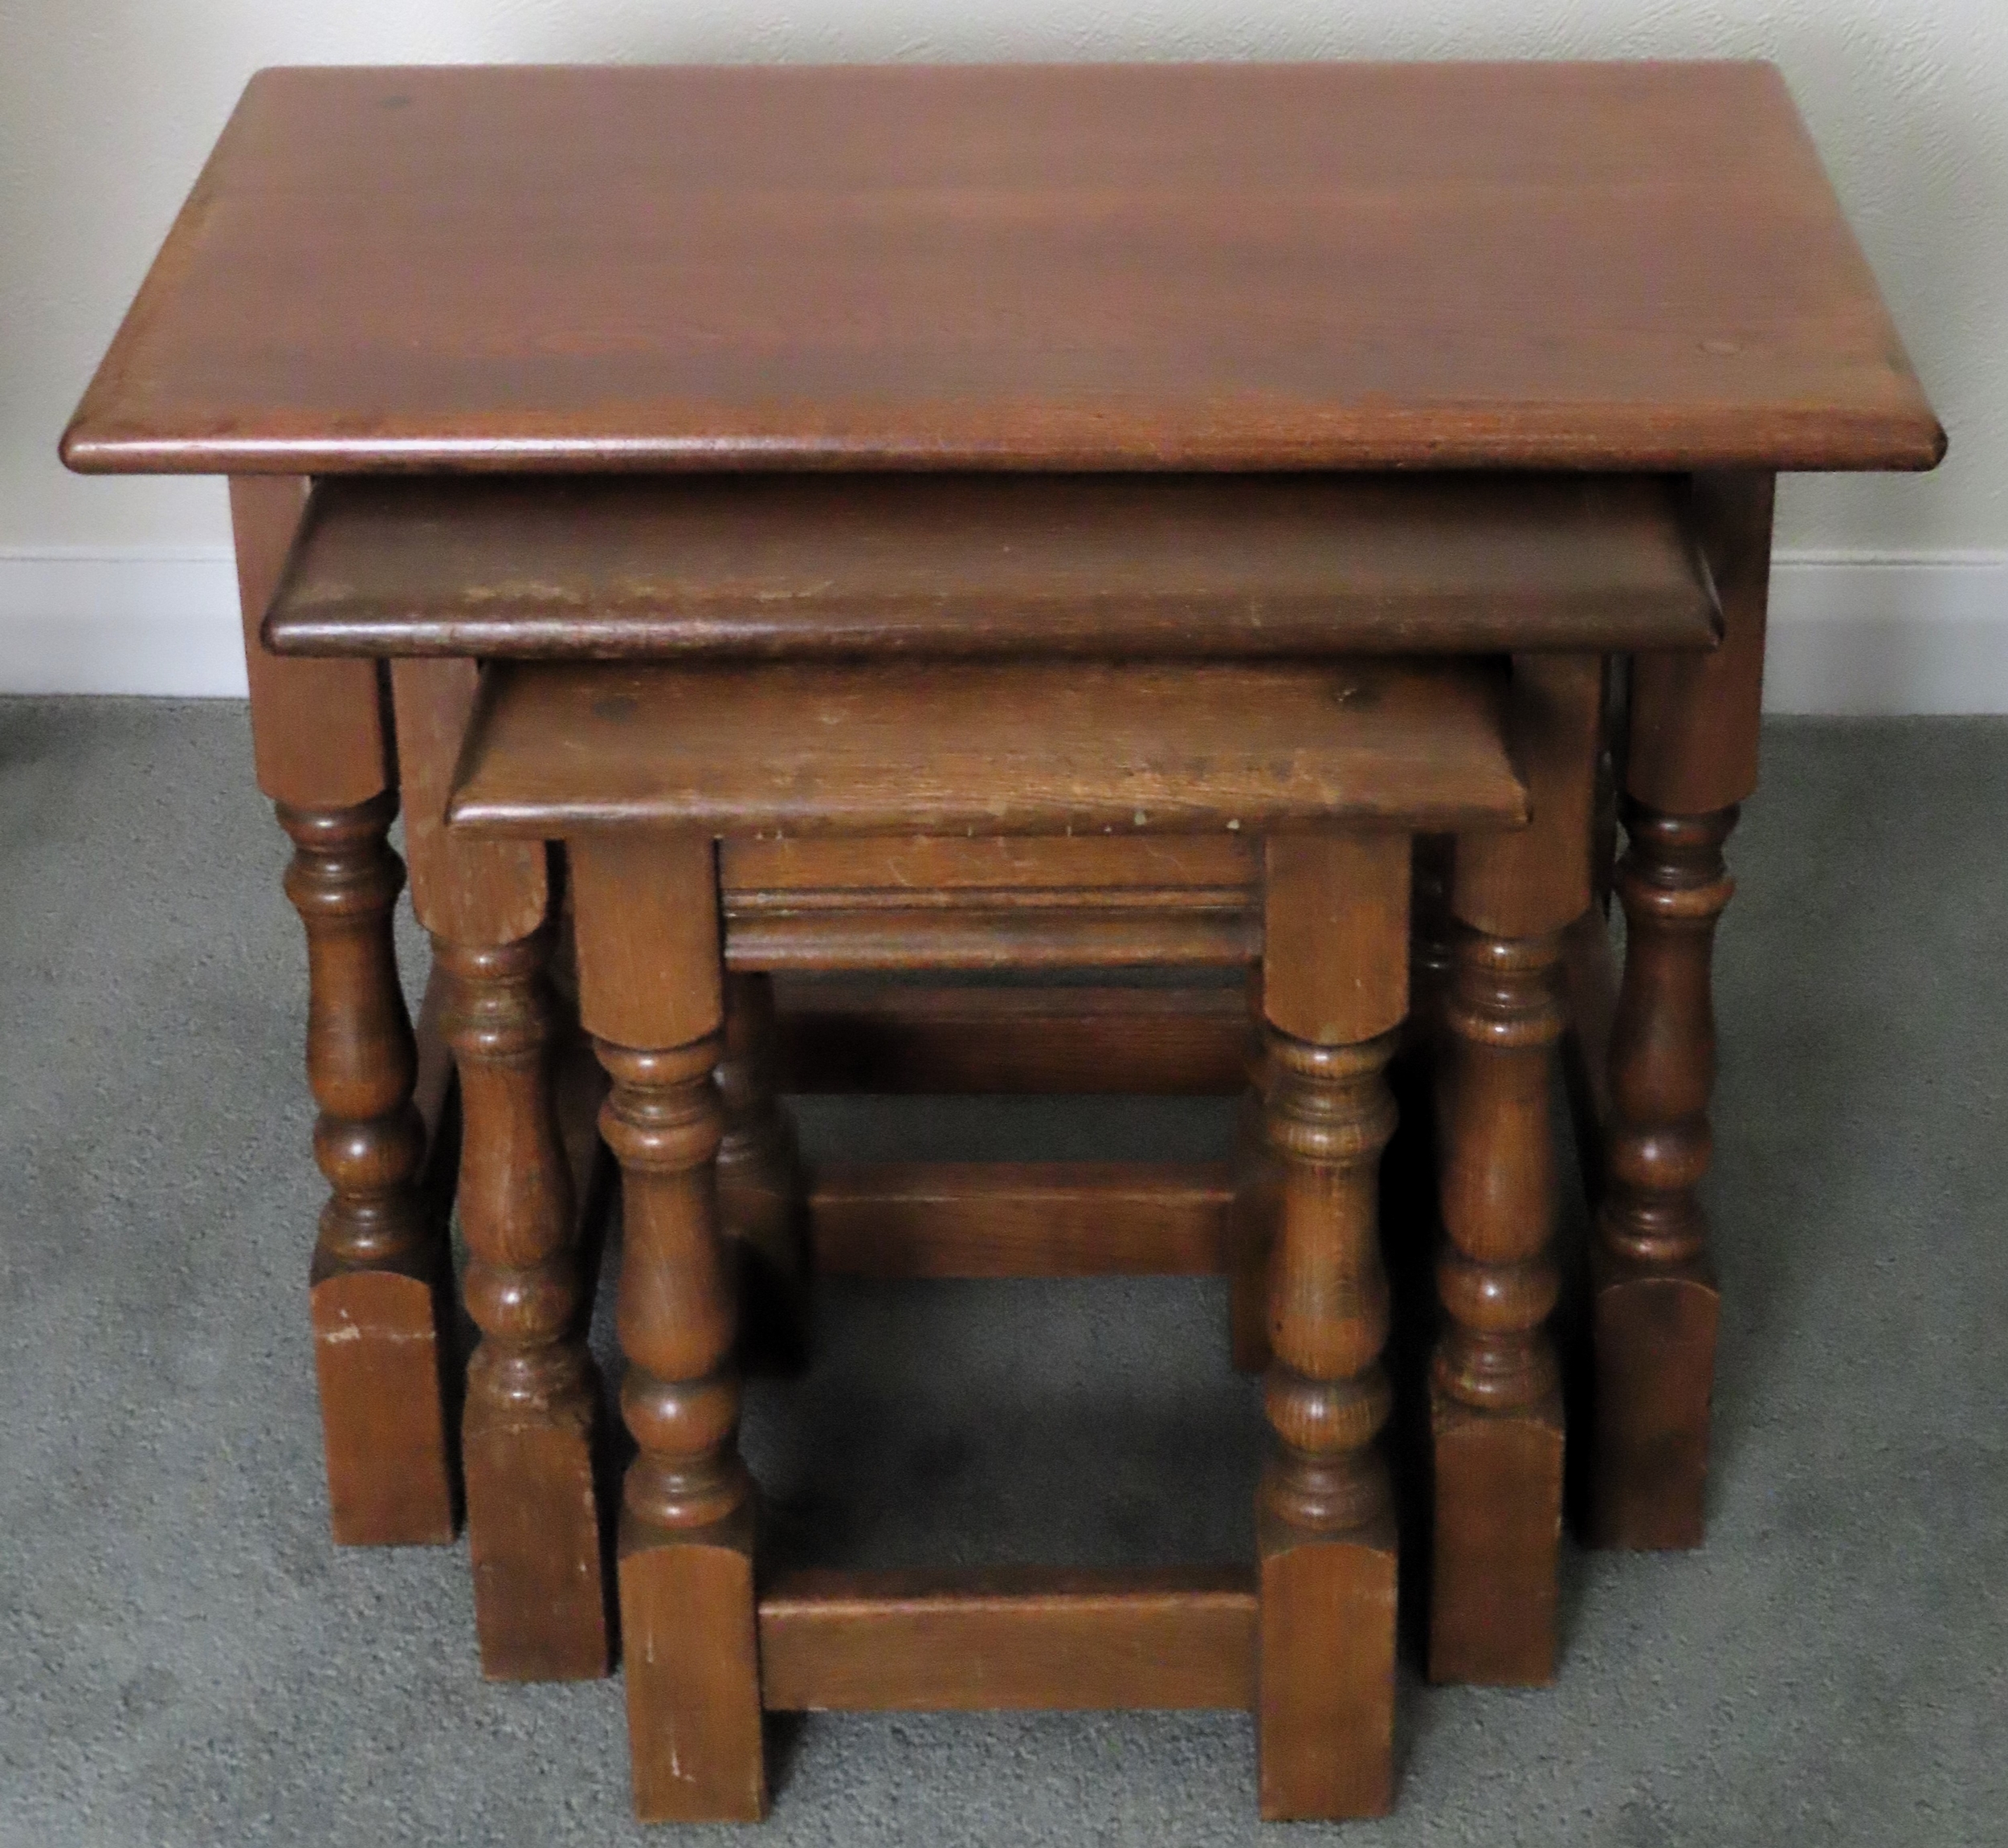 20th century oak nest of three tables. Approx. 45 x 61 x 33cms reasonable used condition with scuffs